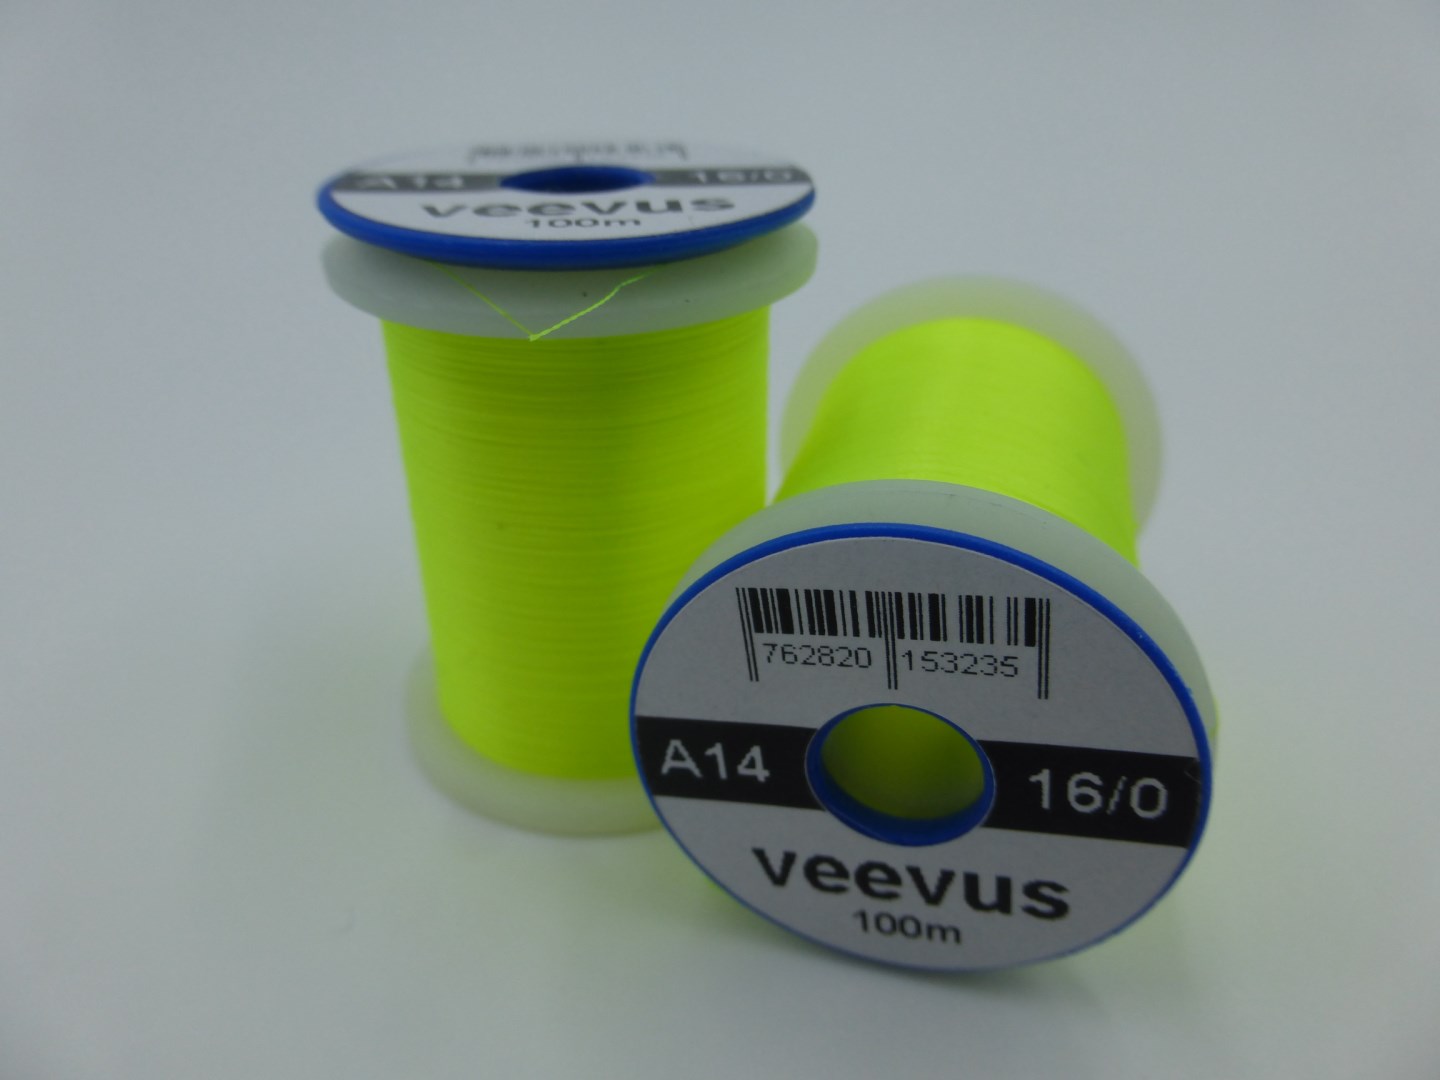 Veevus 16/0 Fluo Yellow A14